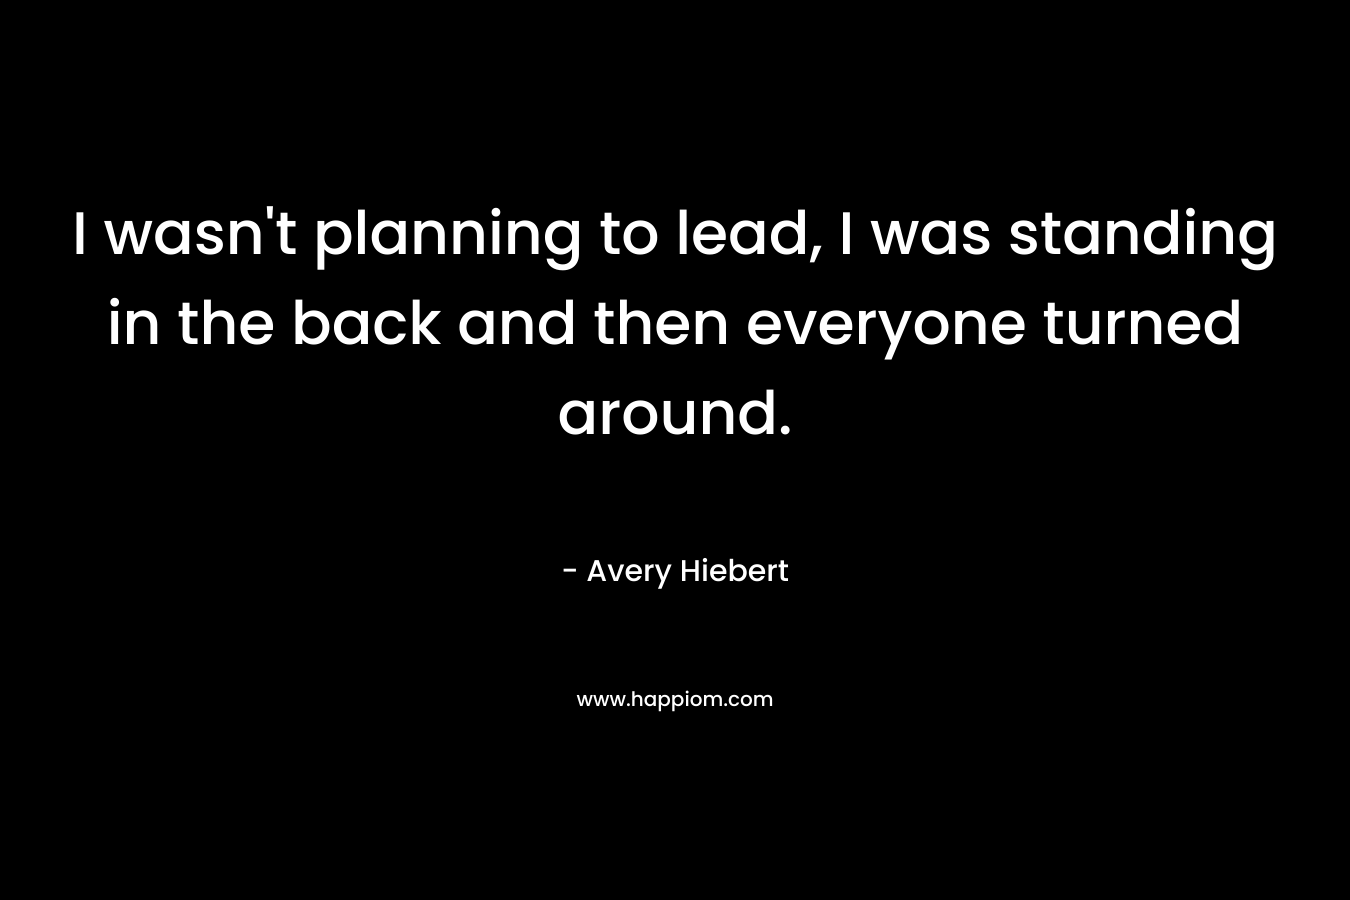 I wasn’t planning to lead, I was standing in the back and then everyone turned around. – Avery Hiebert